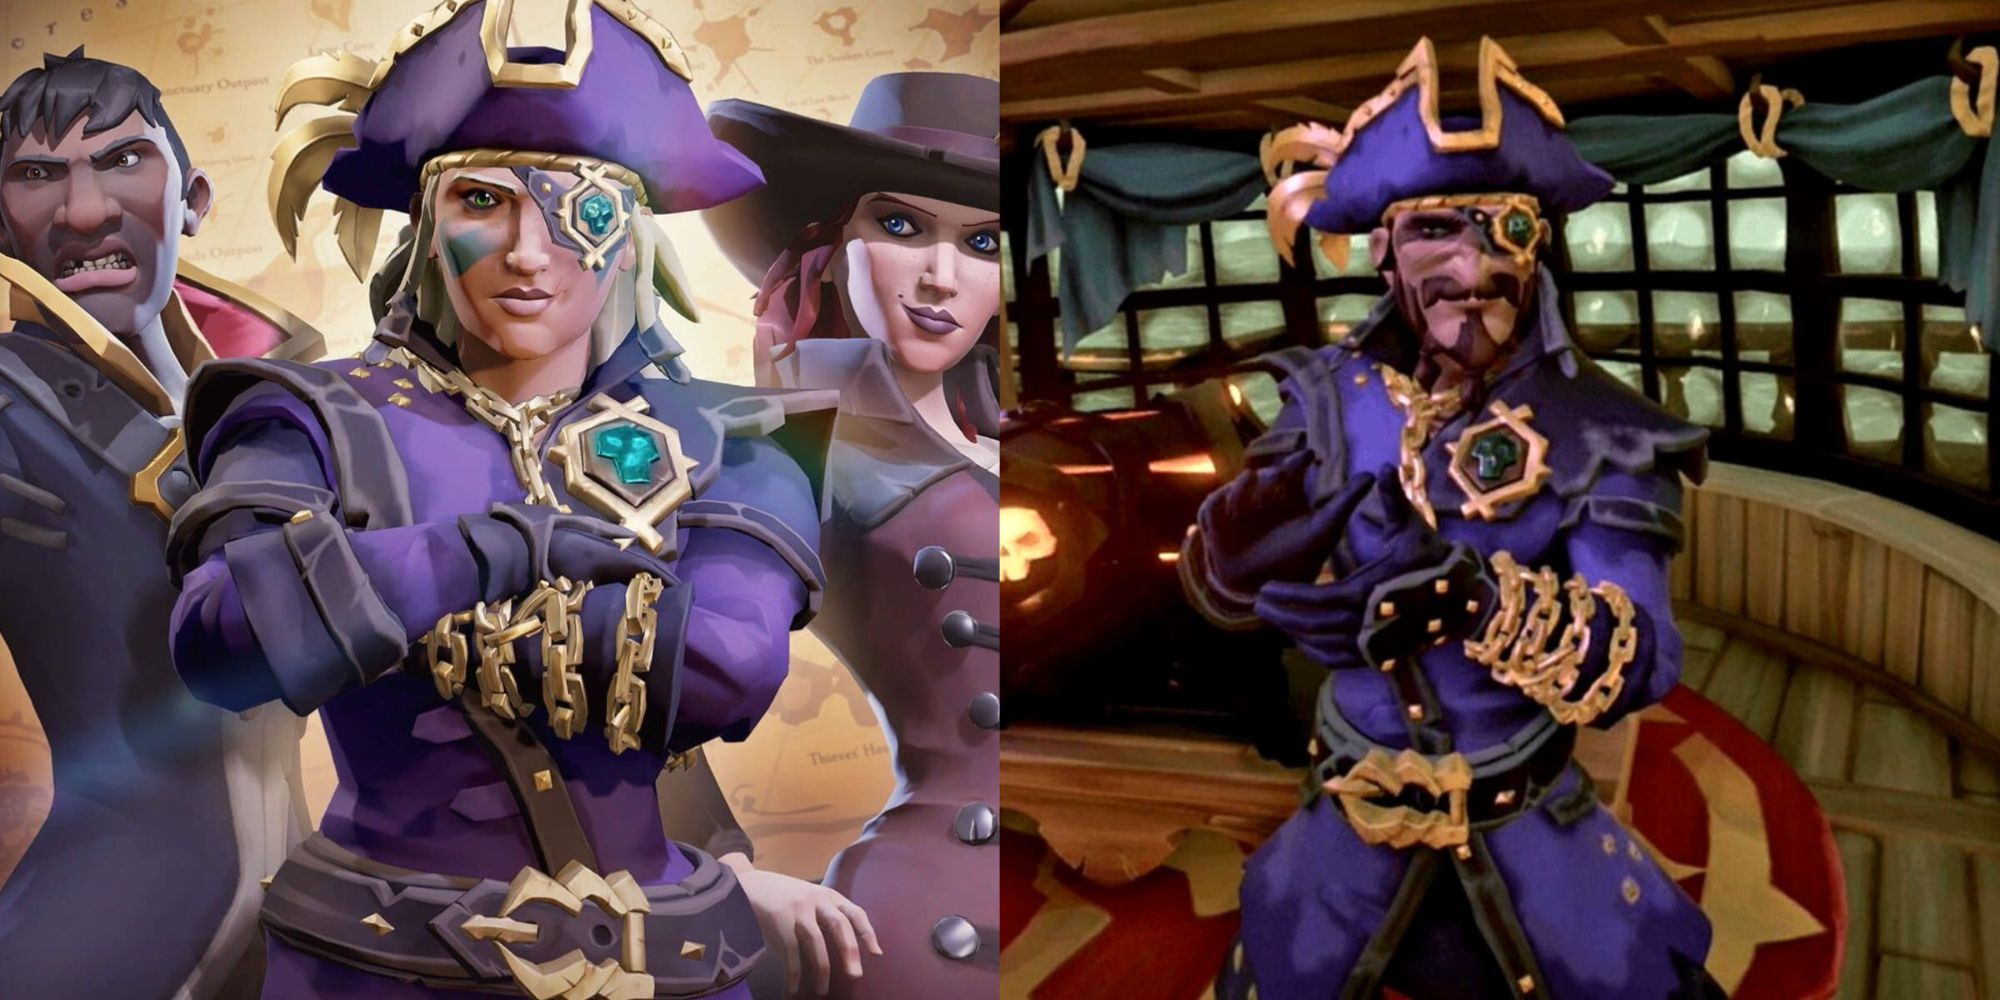 The Legendary Outfit Set For Pirate Legends In Sea Of Thieves